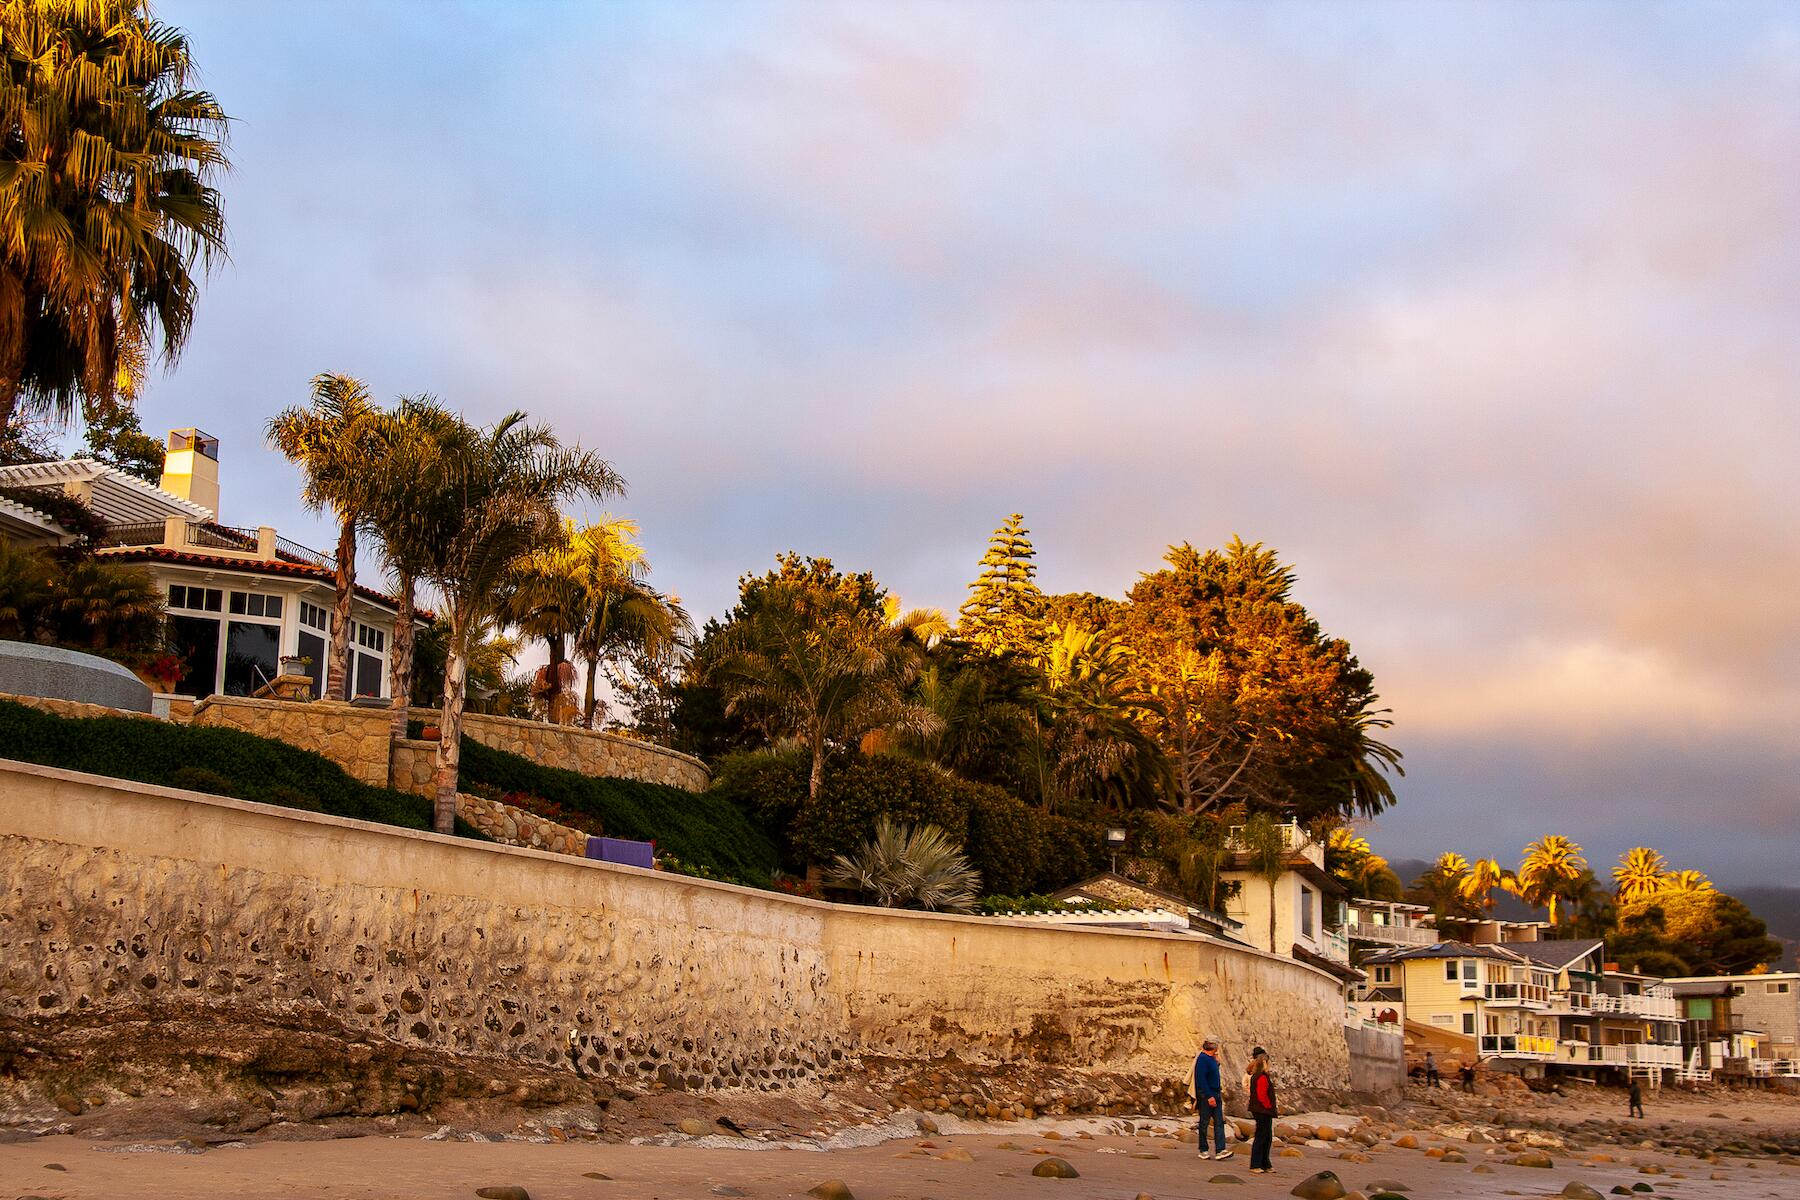 <a href='https://www.fodors.com/world/north-america/usa/california/experiences/news/photos/12-quaint-seaside-villages-to-explore-in-california#'>From &quot;12 Beautiful California Coastal Towns You Must Visit: Montecito&quot;</a>